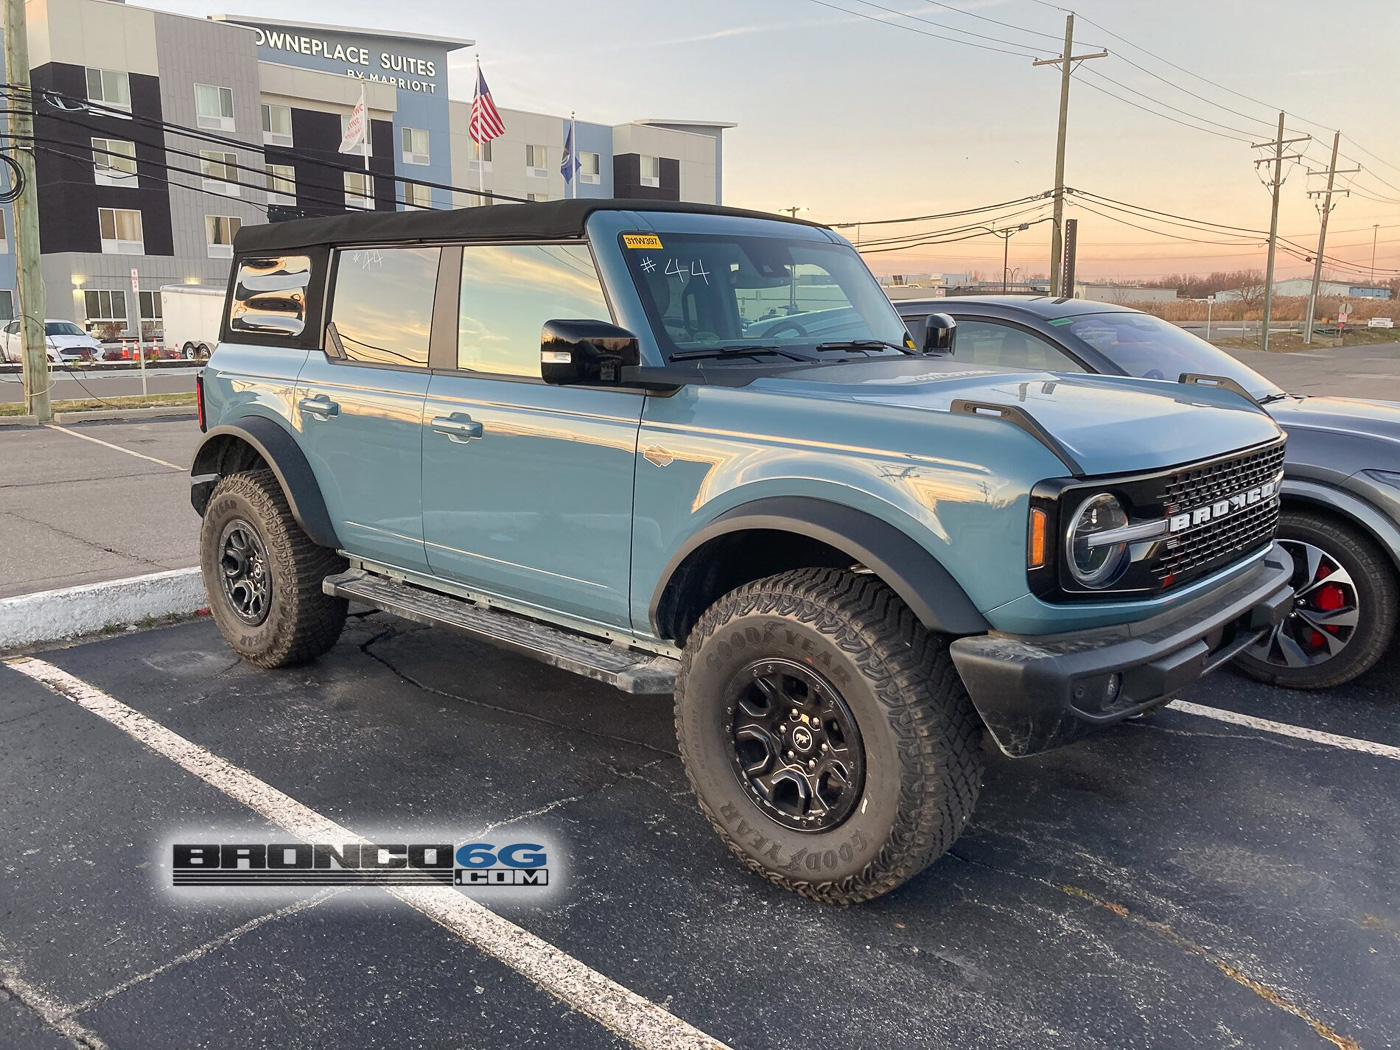 Ford Bronco 4 Door Sasquatch Picture Thread (No CGI, only real pics) bcc500ac03771485ac2df1b0068542bd